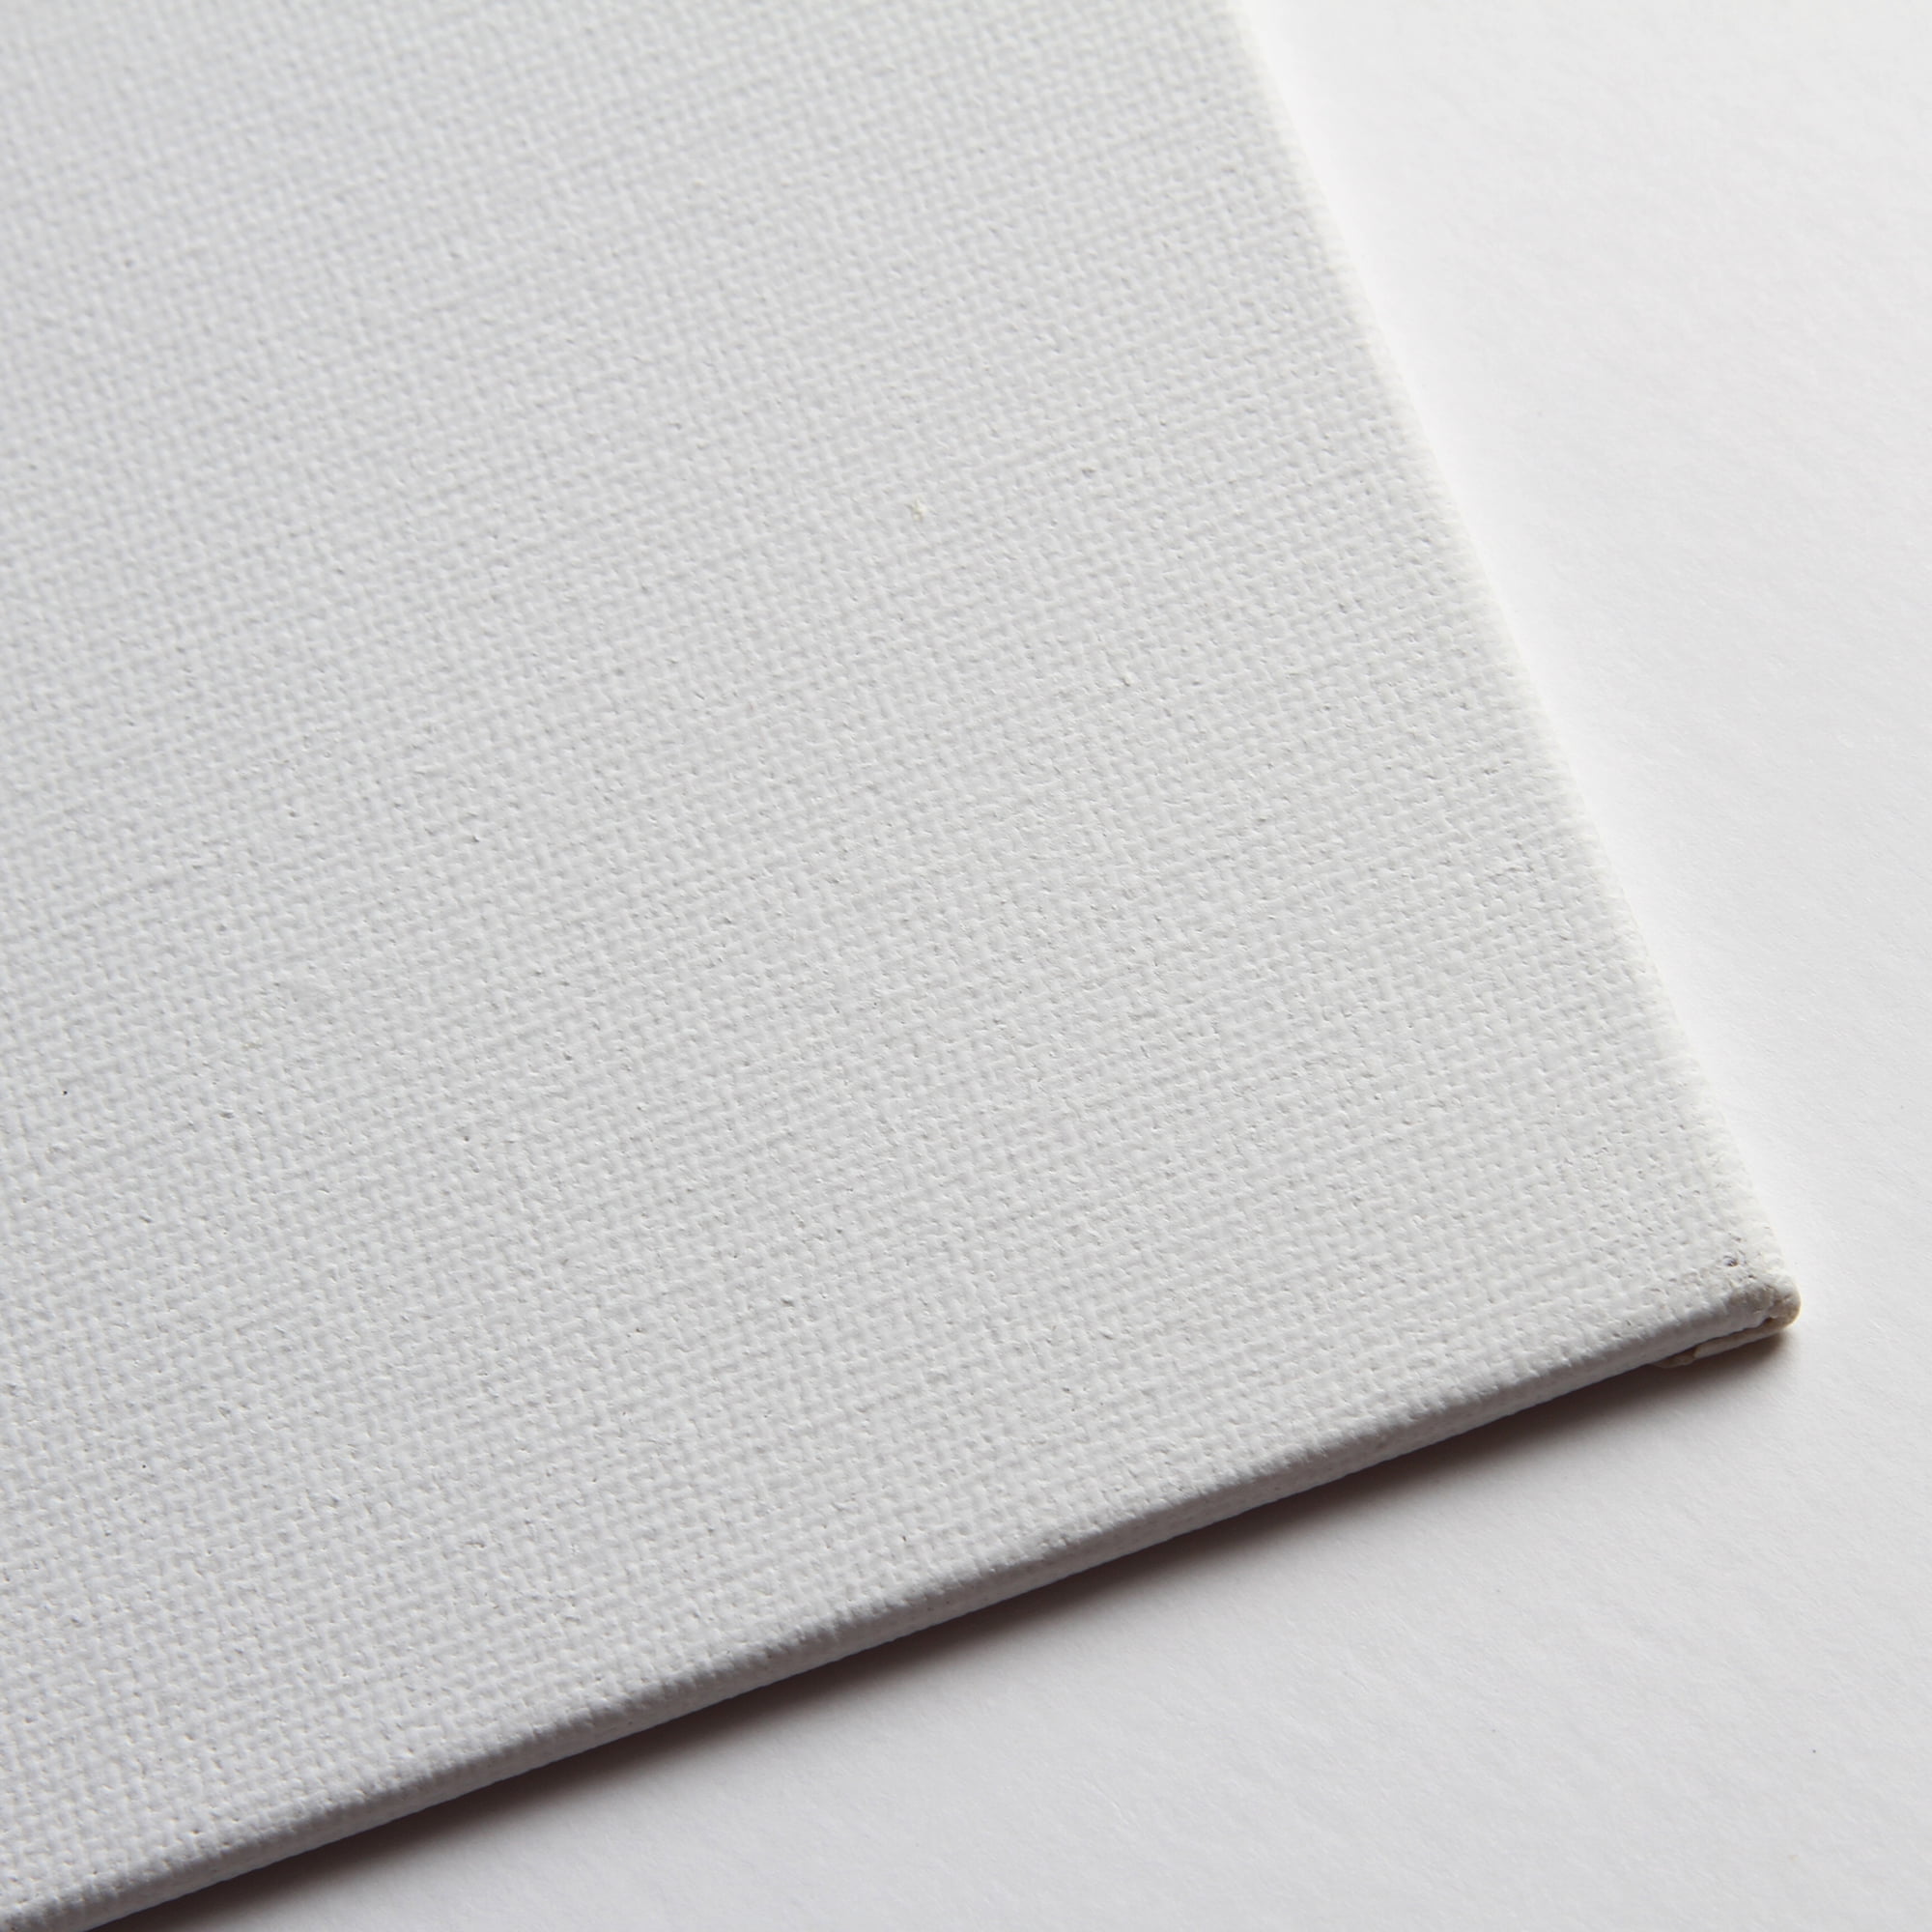 1 Daler Rowney Blank Canvas 20X50Cm 8X20 Pack Size 